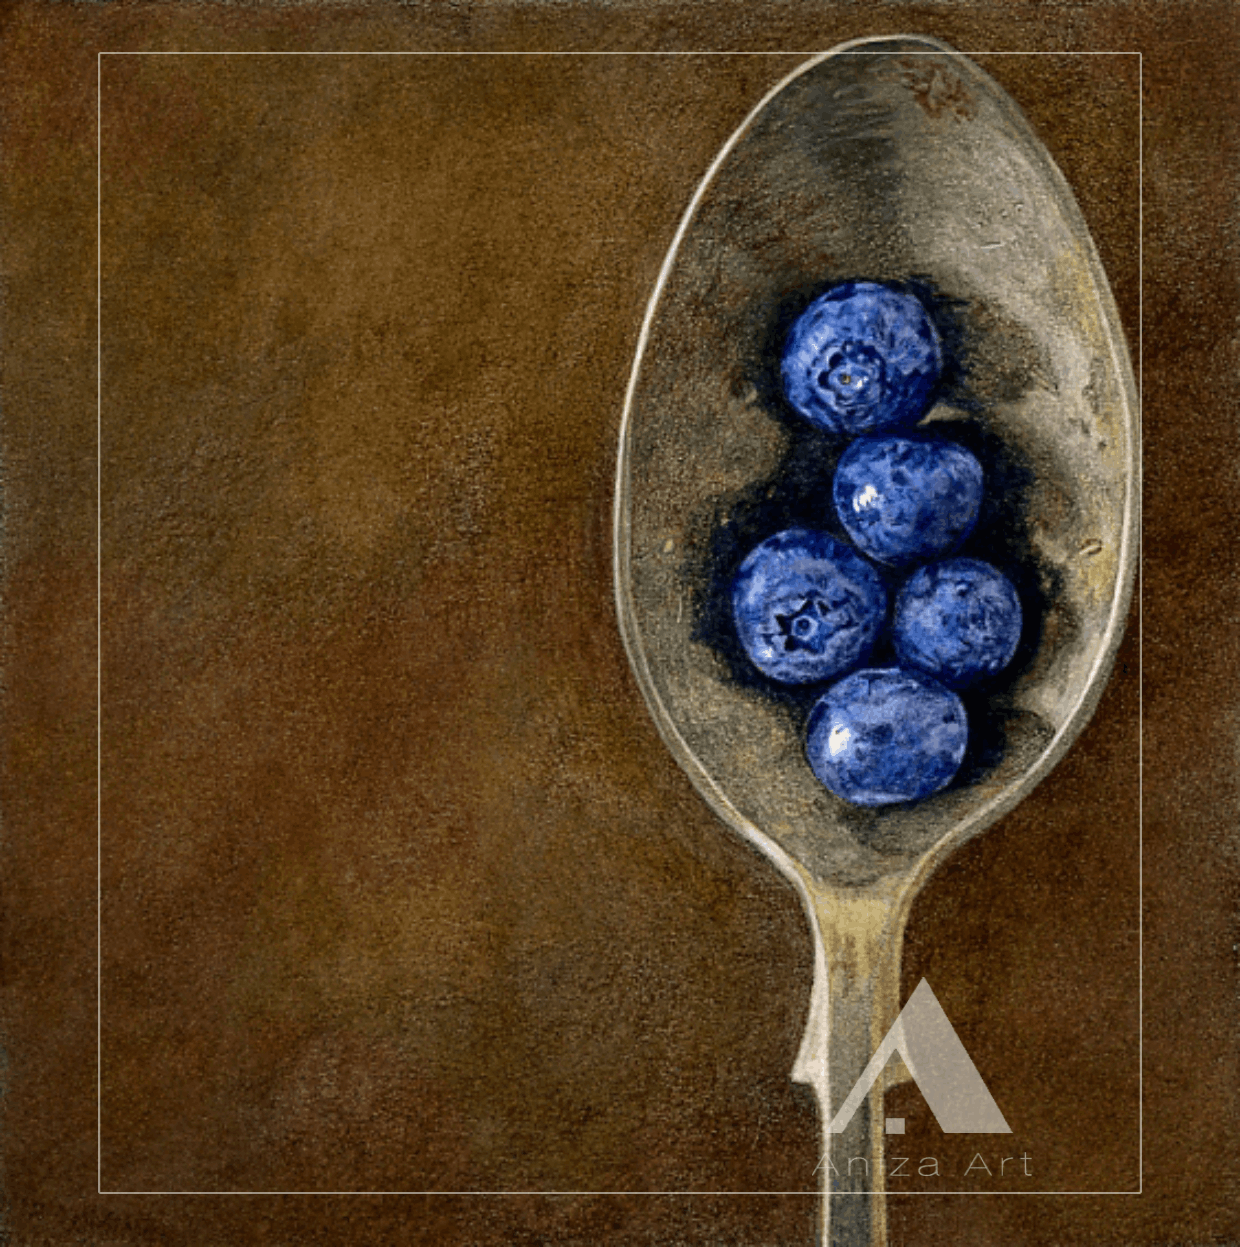 blueberries in an antique spoon